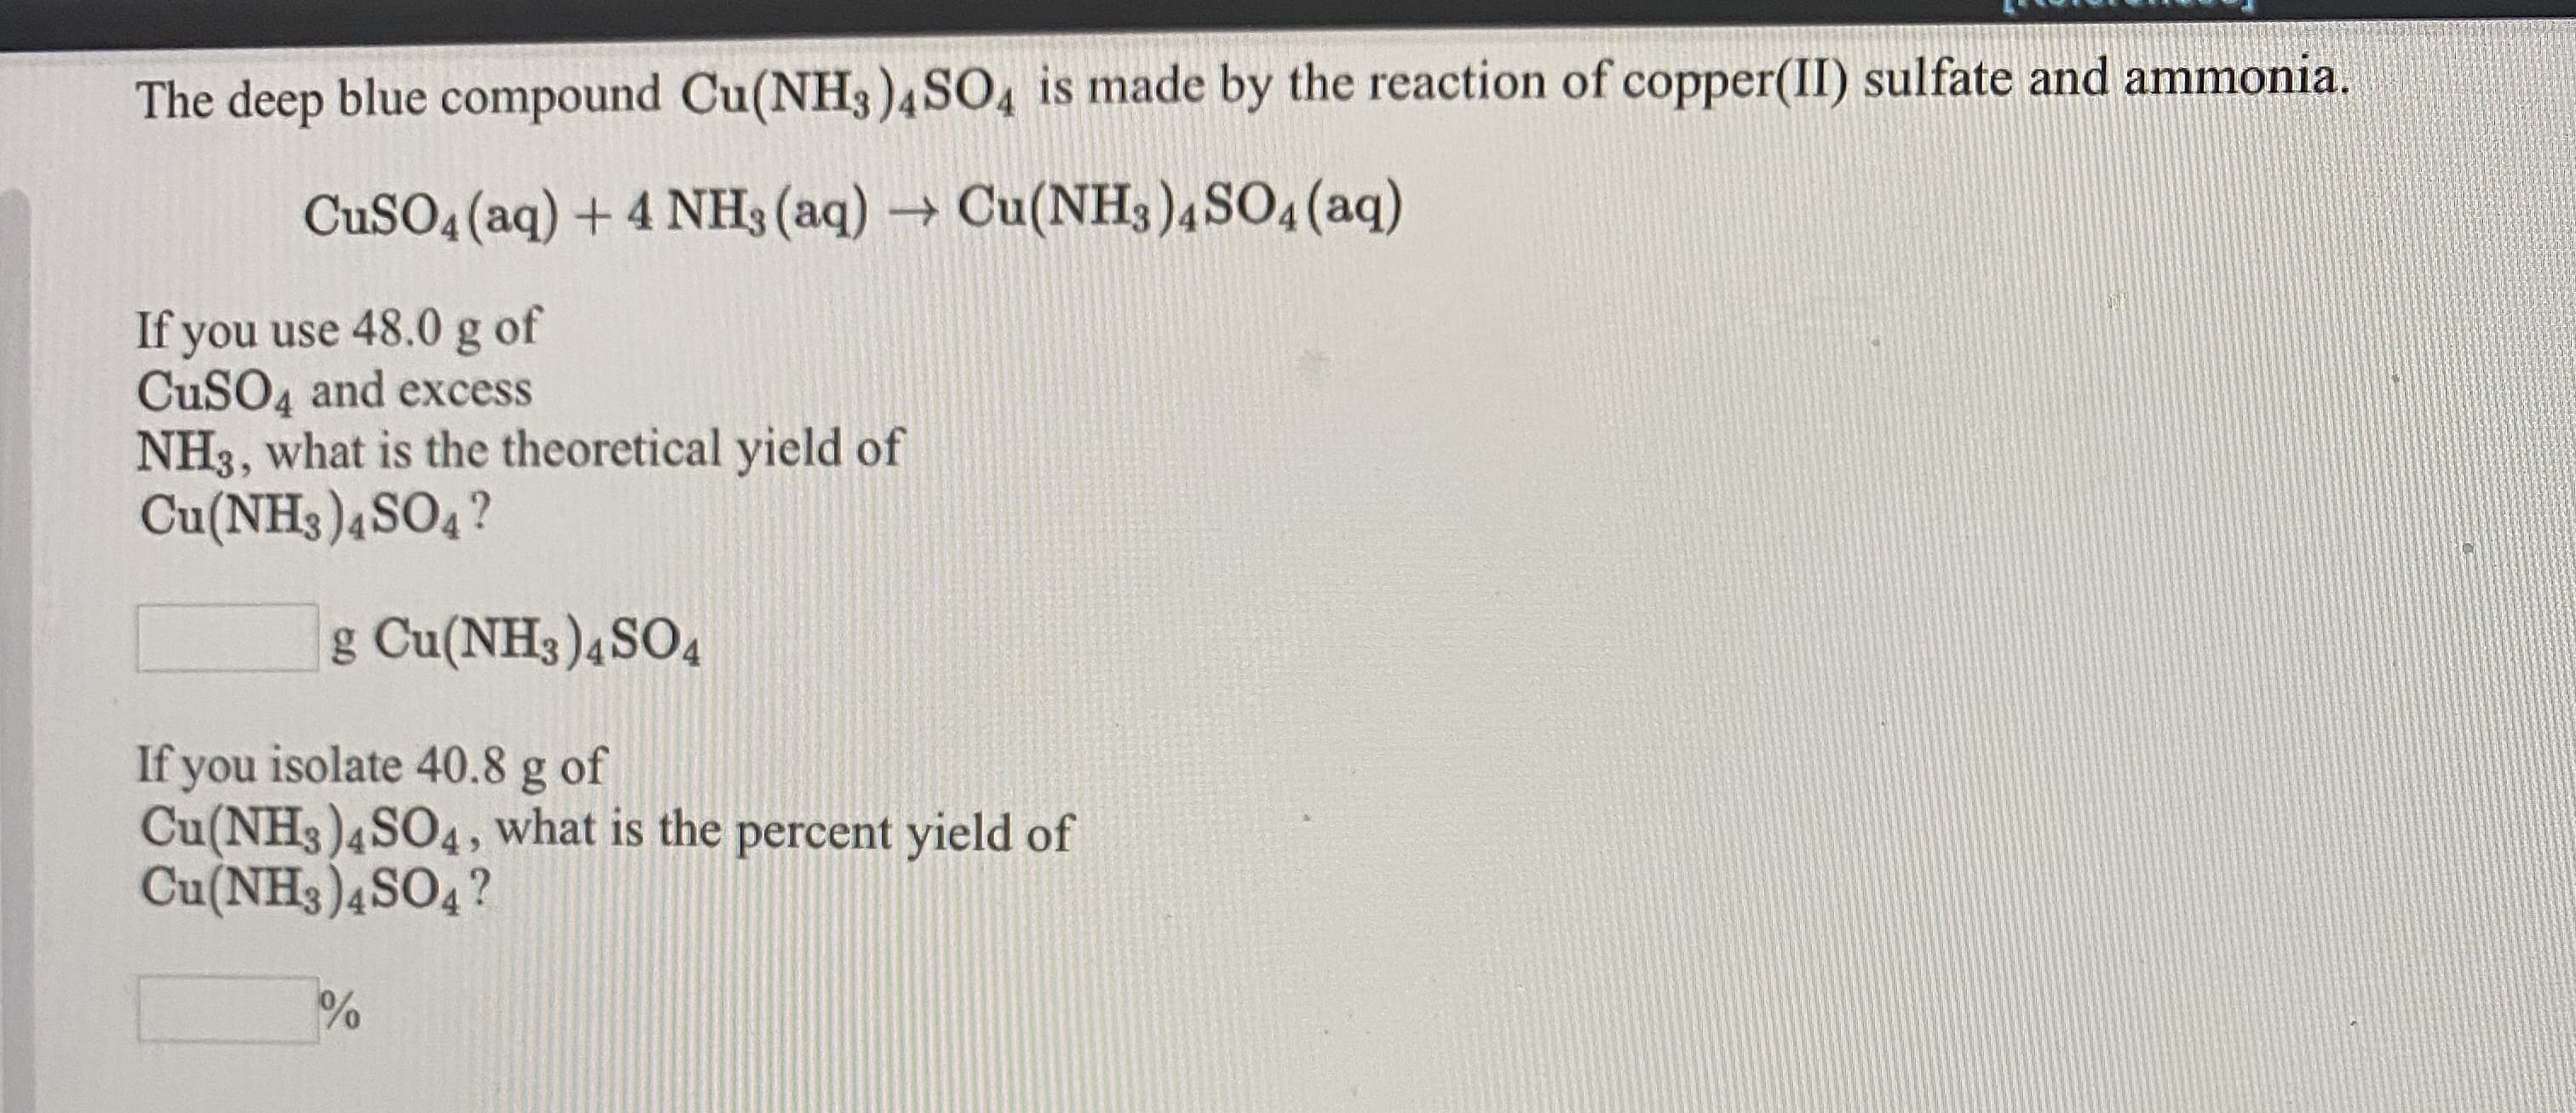 The deep blue compound Cu(NH3)4SO, is made by the reaction of copper(II) sulfate and ammonia.
CuSO4 (aq) + 4 NH3(aq) → Cu(NH3)4SO4 (aq)
If you use 48.0 g of
CUSO4 and excess
NH3, what is the theoretical yield of
Cu(NH3)4SO4?
g Cu(NH3)4SO4
If you isolate 40.8 g of
Cu(NH3)4SO4, what is the percent yield of
Cu(NH3)4SO4?
